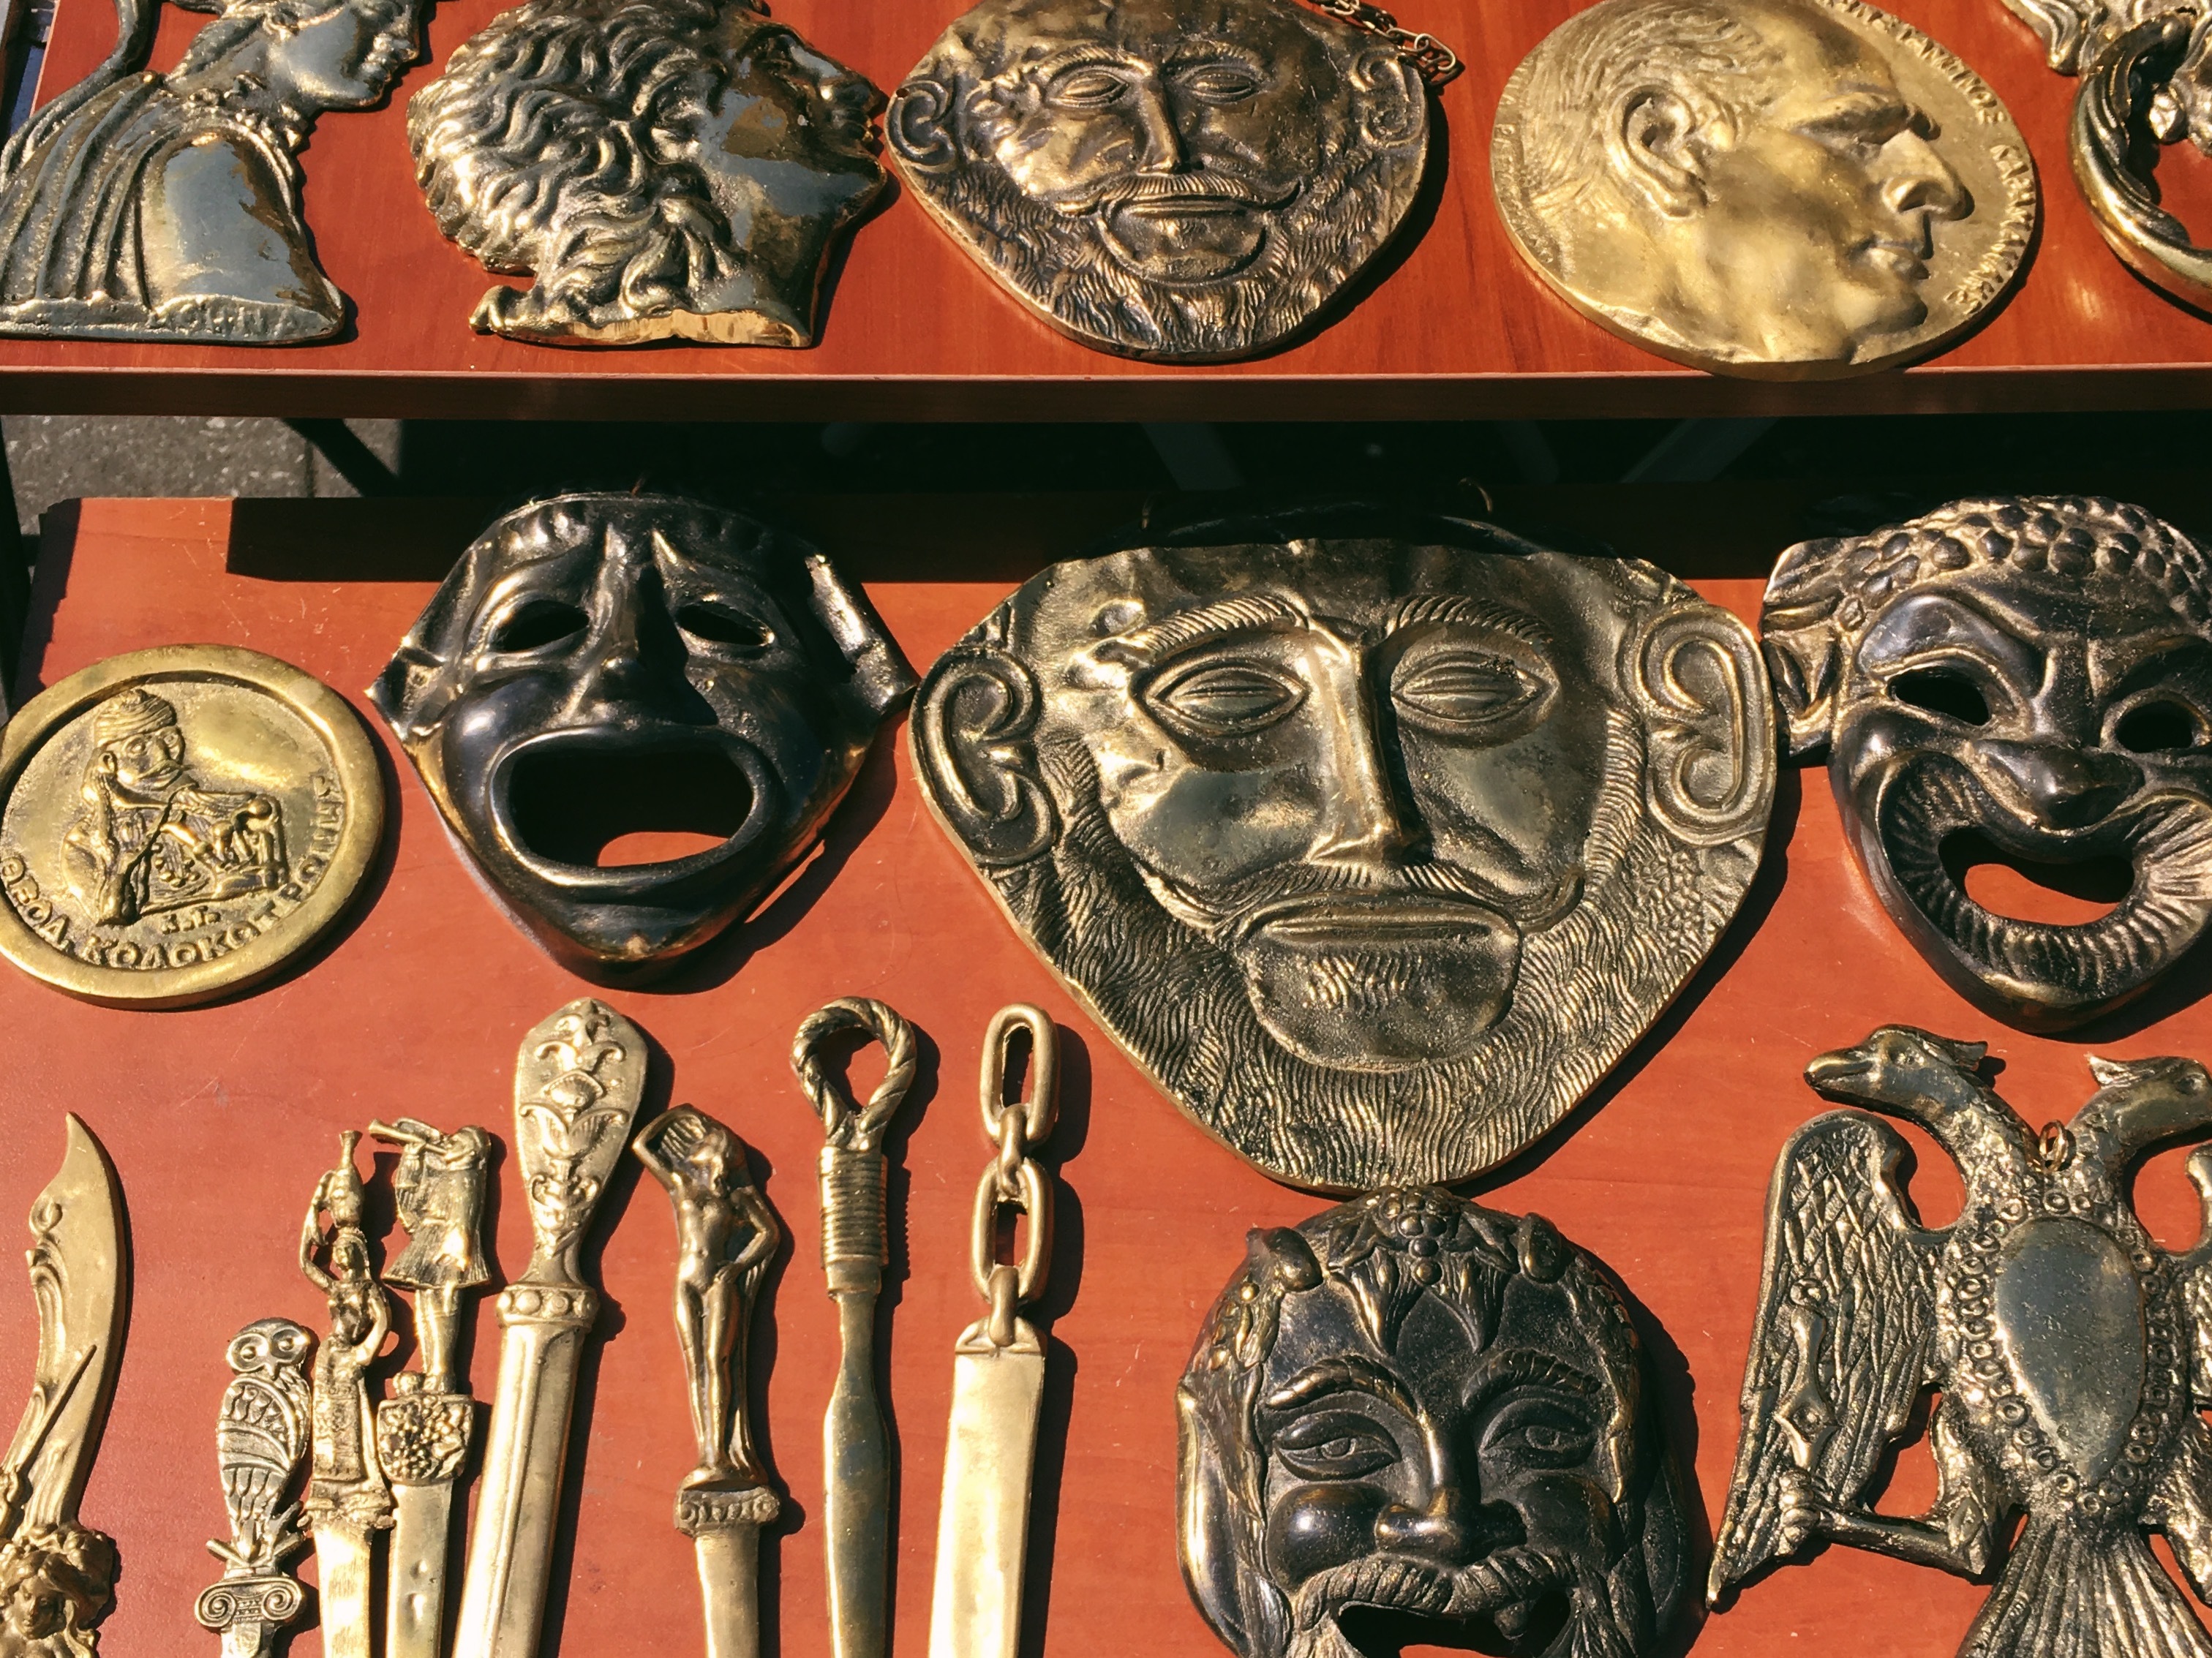 An array of copper masks are displayed on top of a red surface.